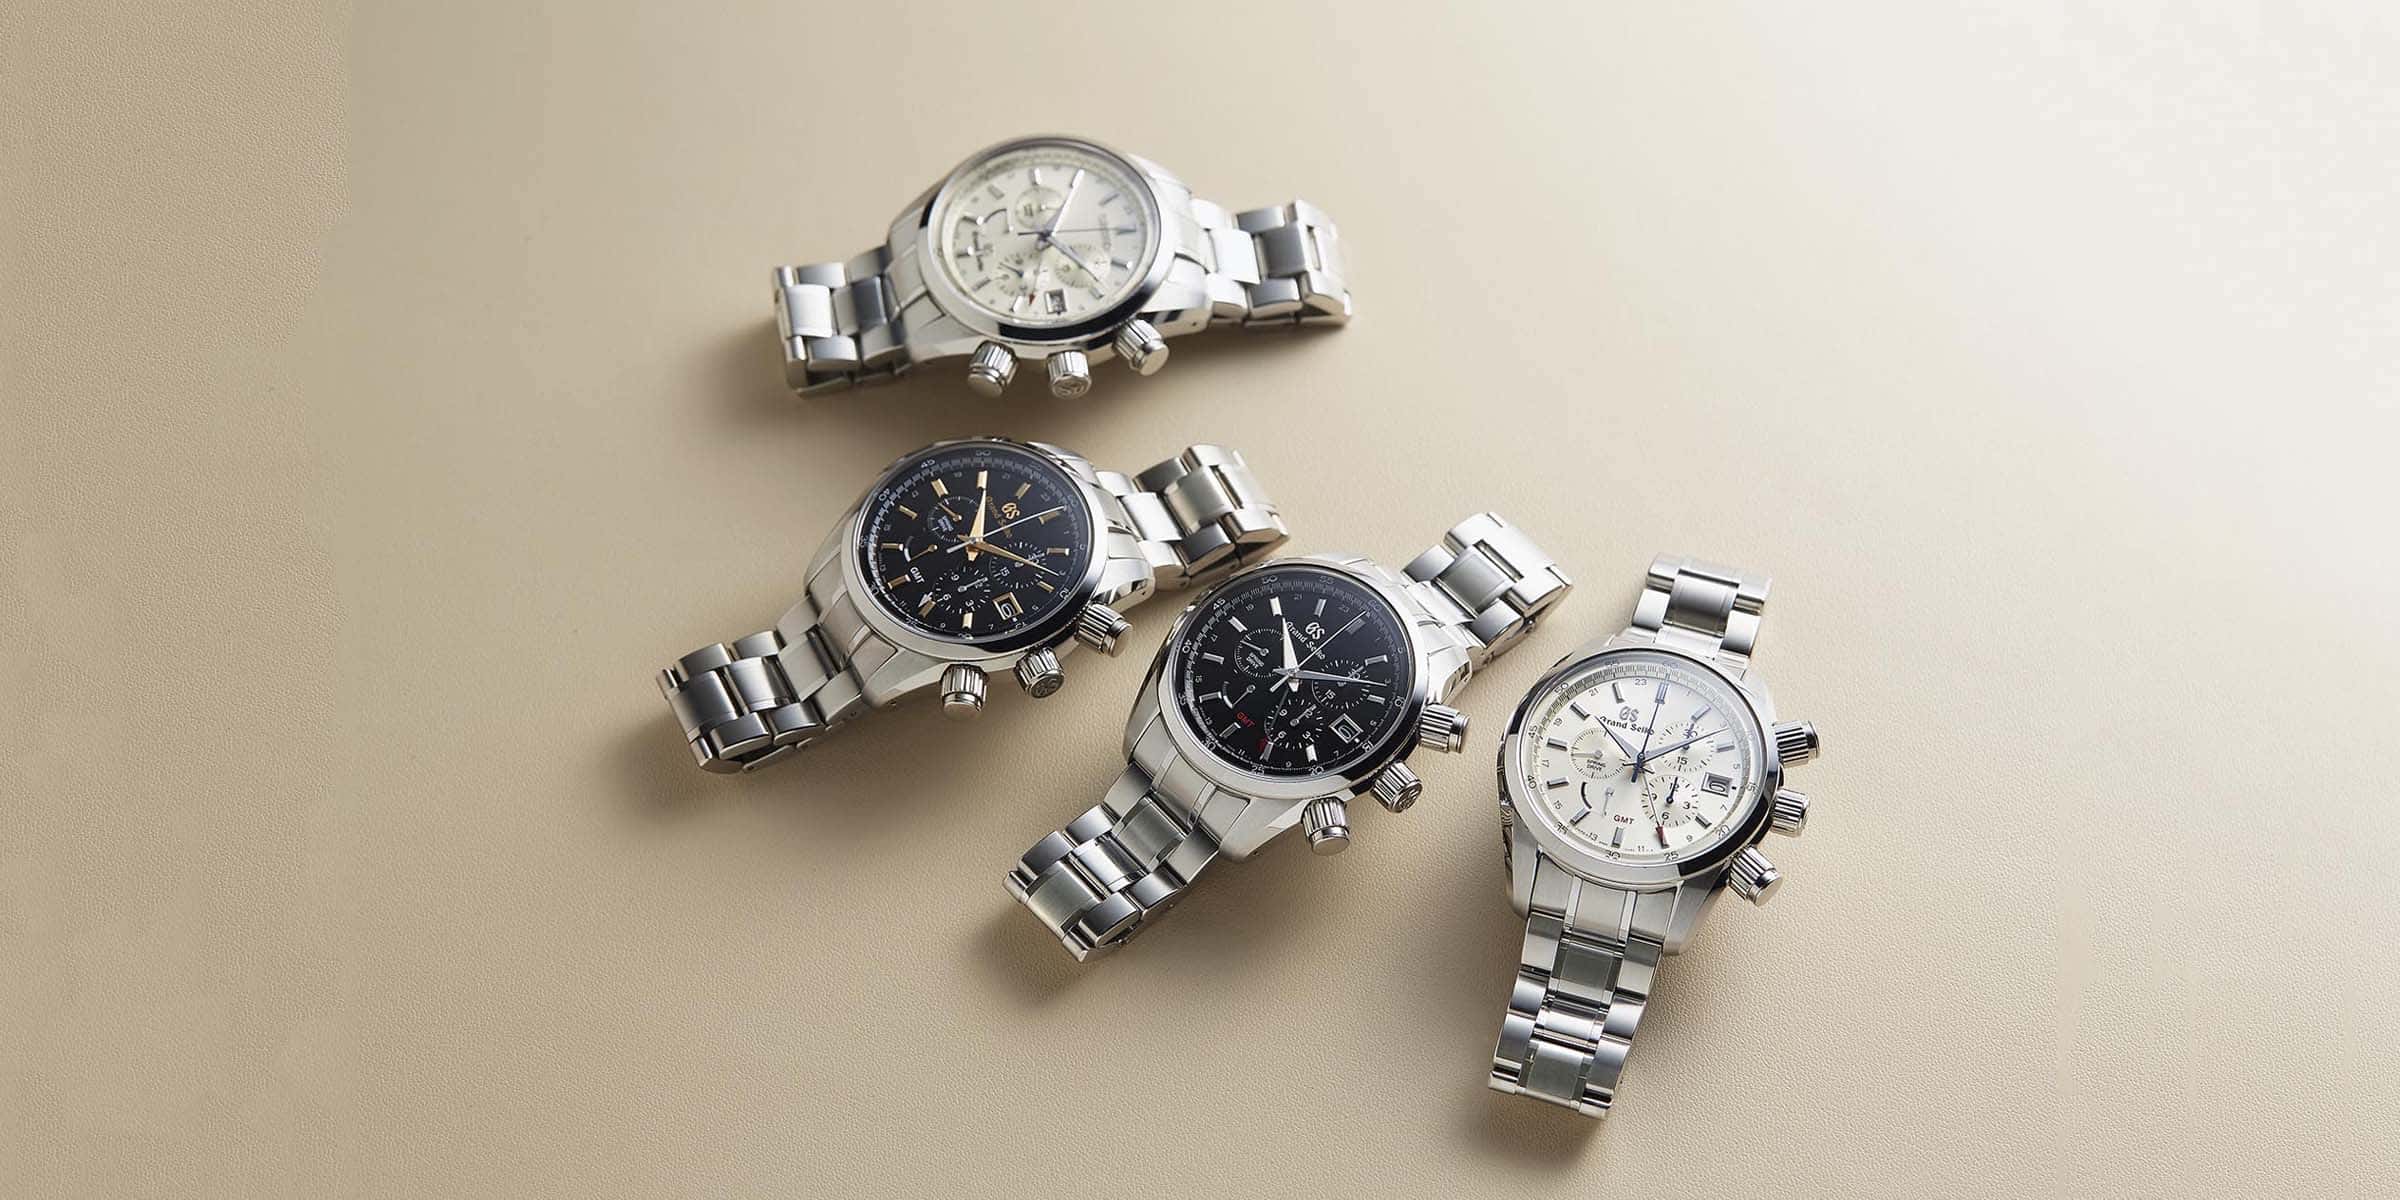 Grand Seiko Luxury Watches: All Models & Prices (Buying Guide)